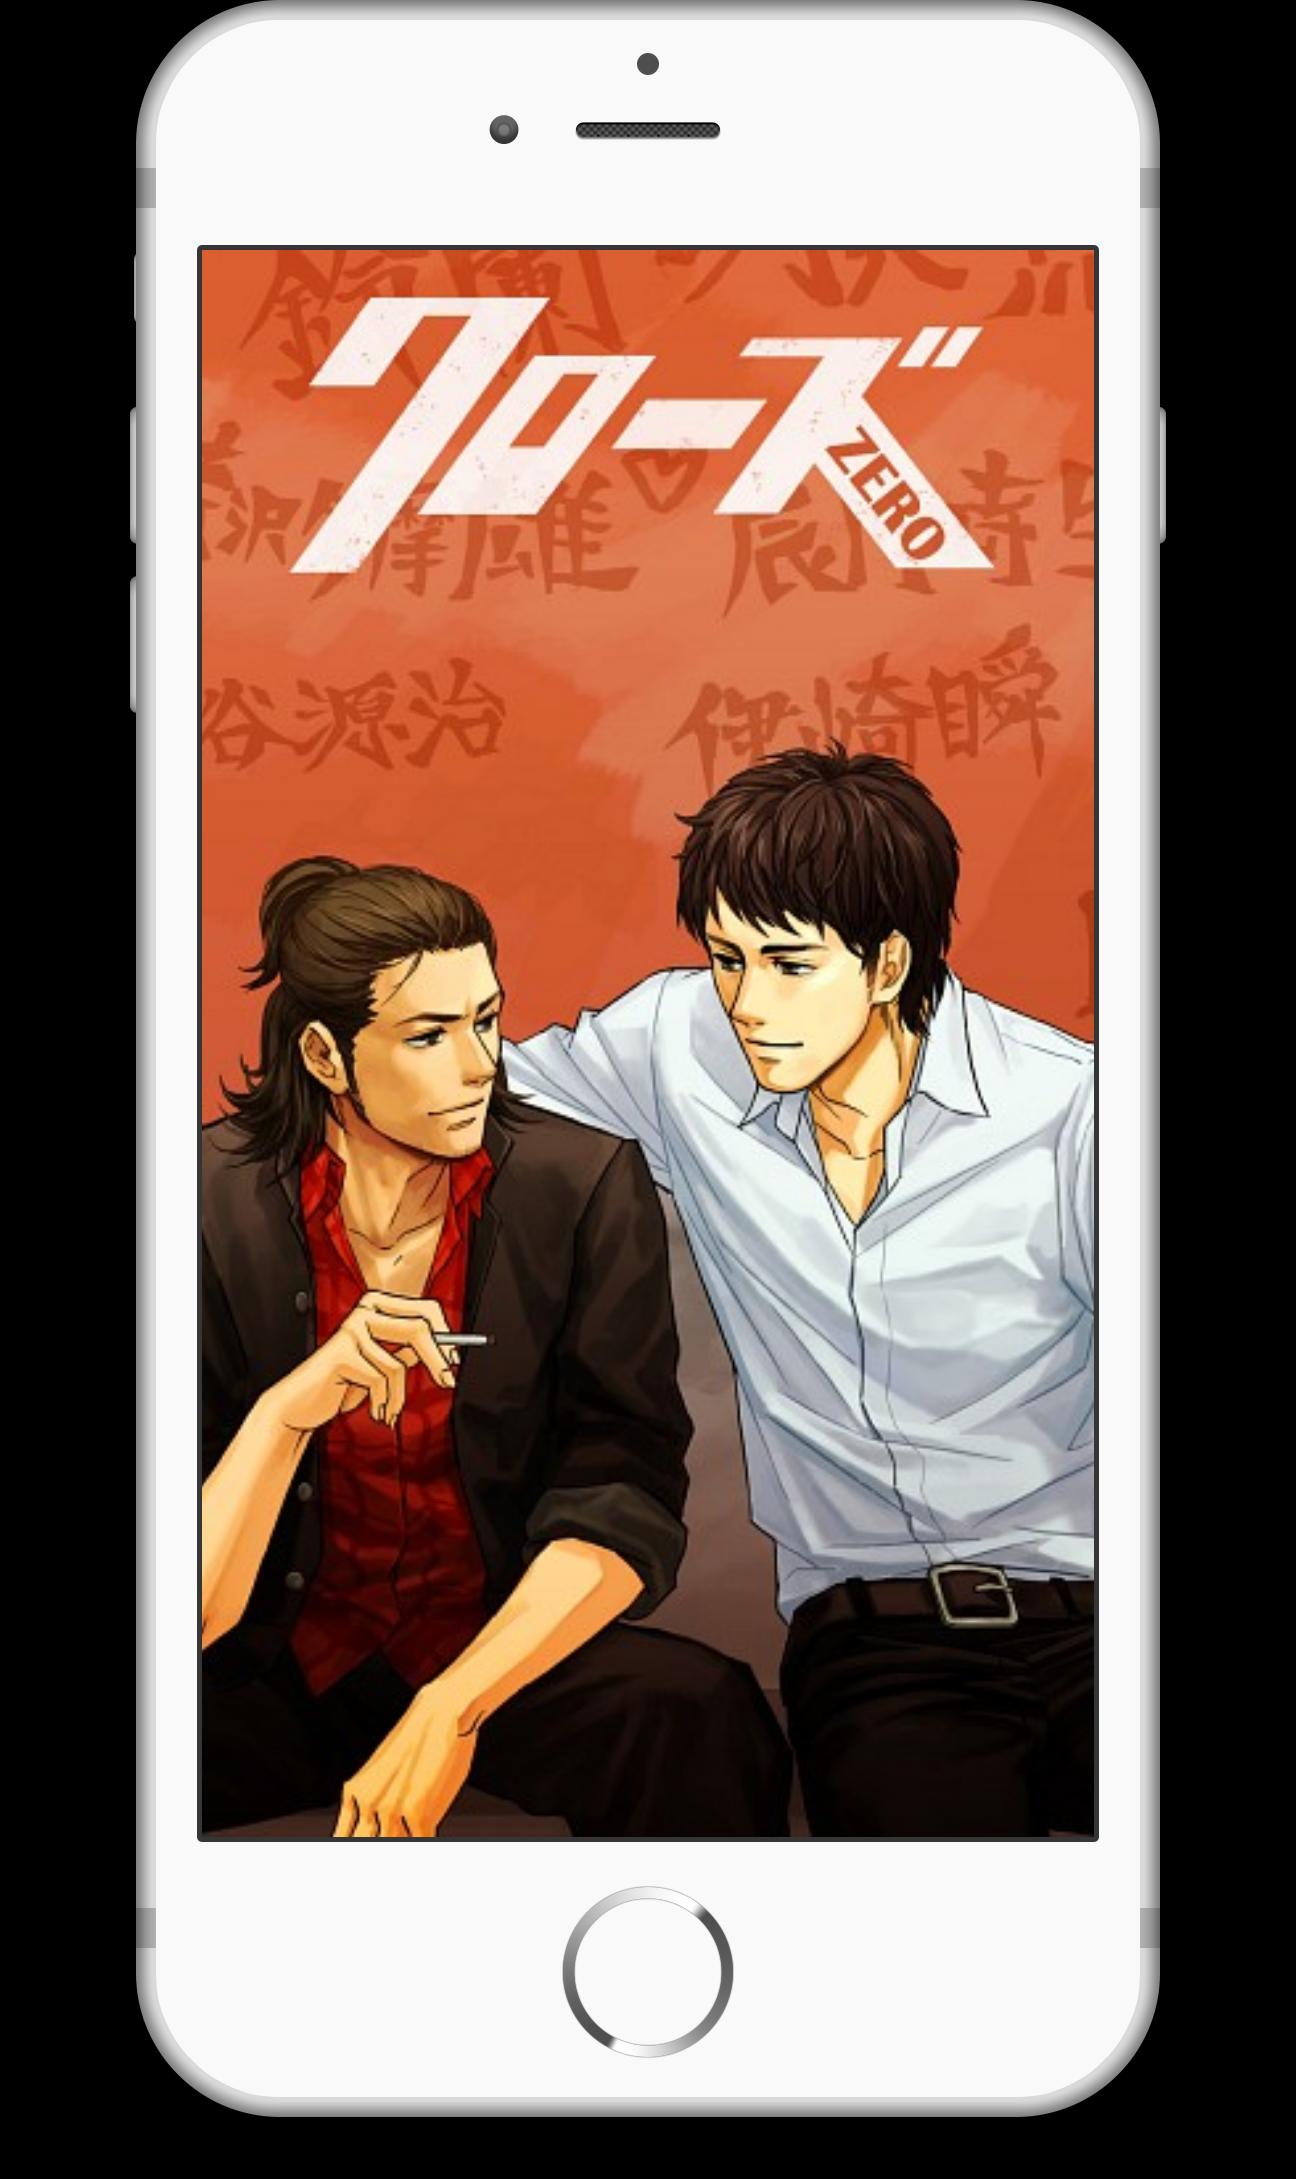 Crows Zero Live Wallpapers 4k Hd For Android Apk Download